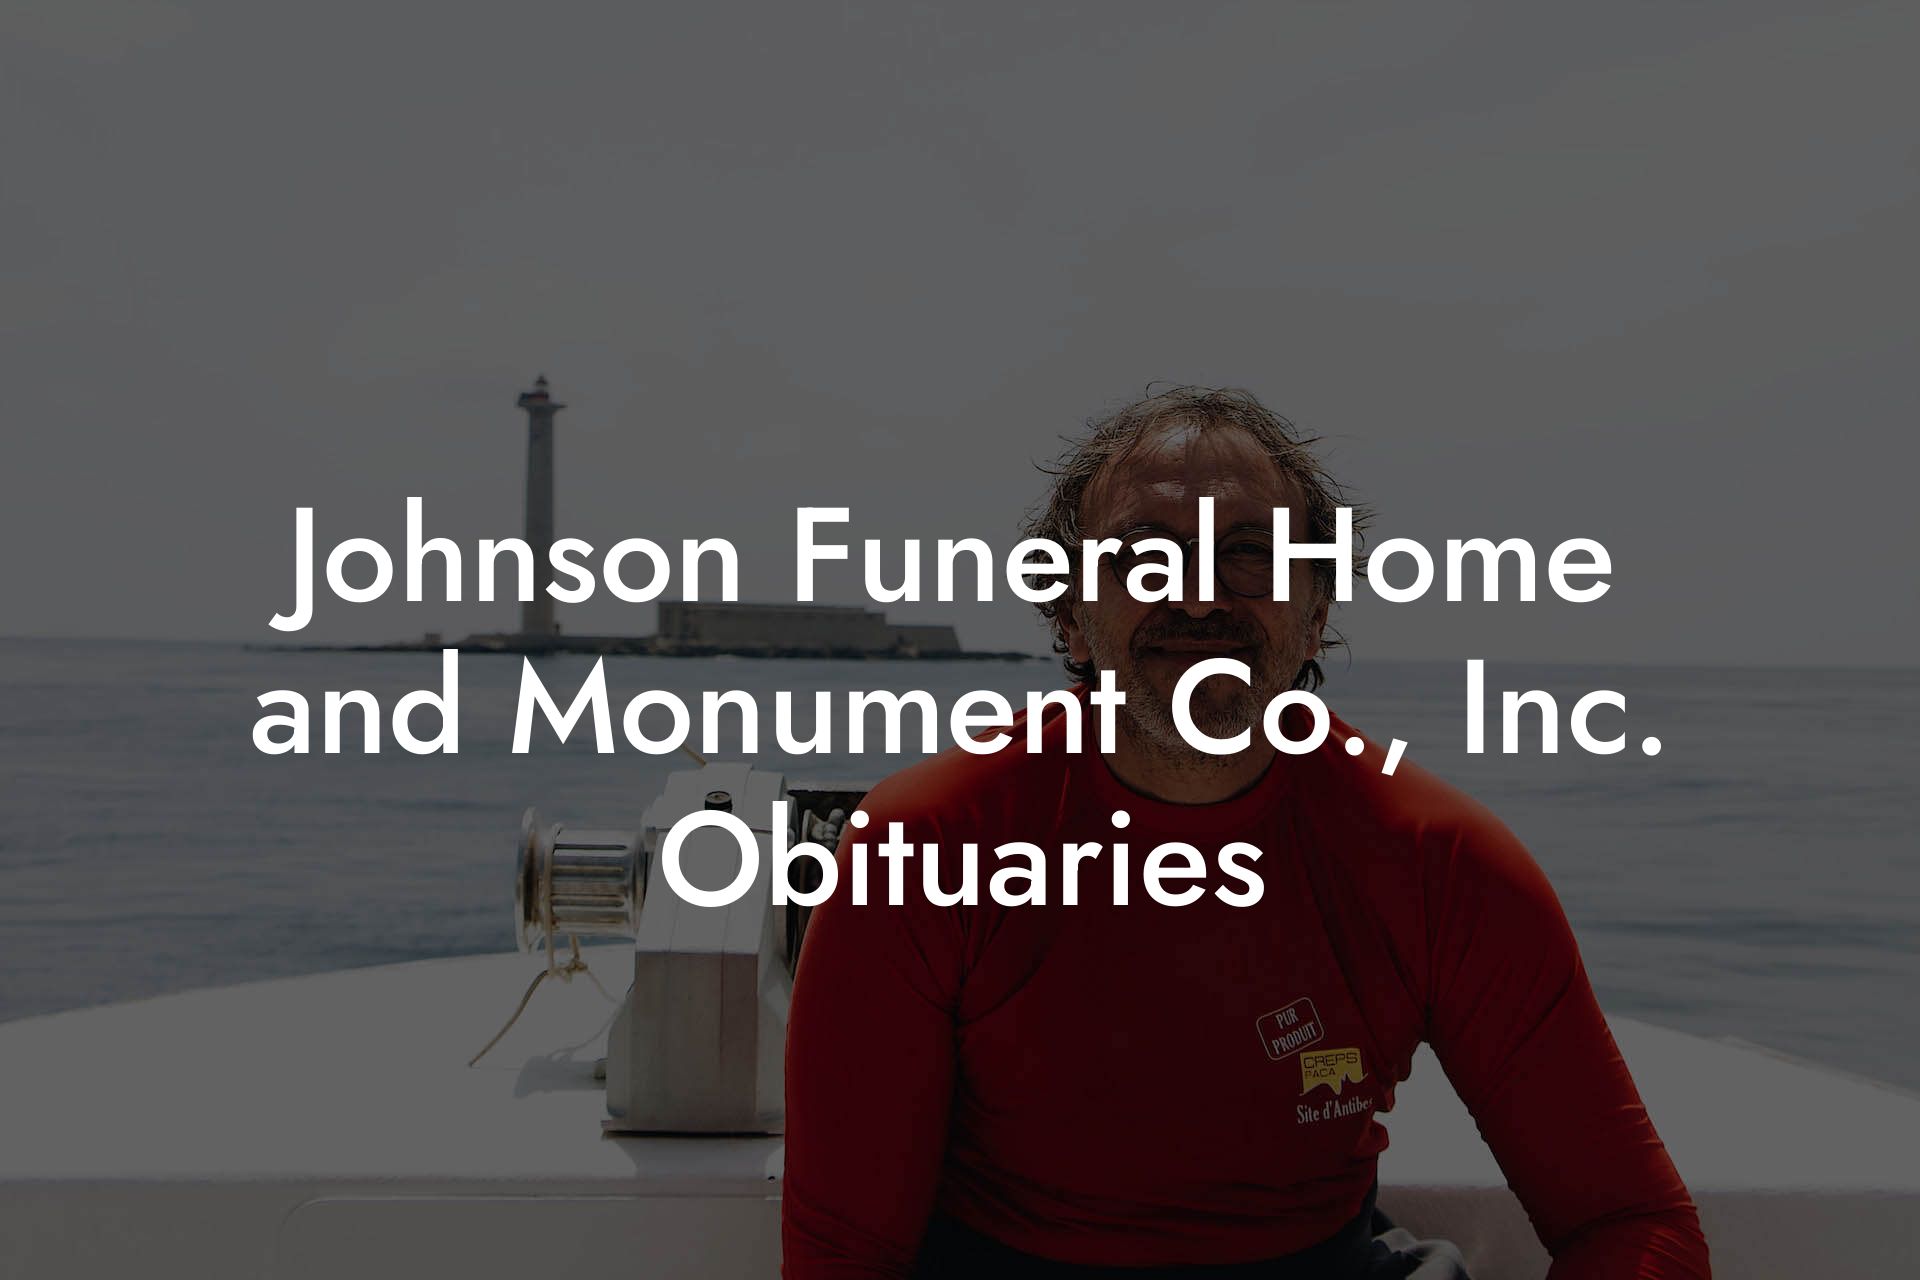 Johnson Funeral Home and Monument Co., Inc. Obituaries